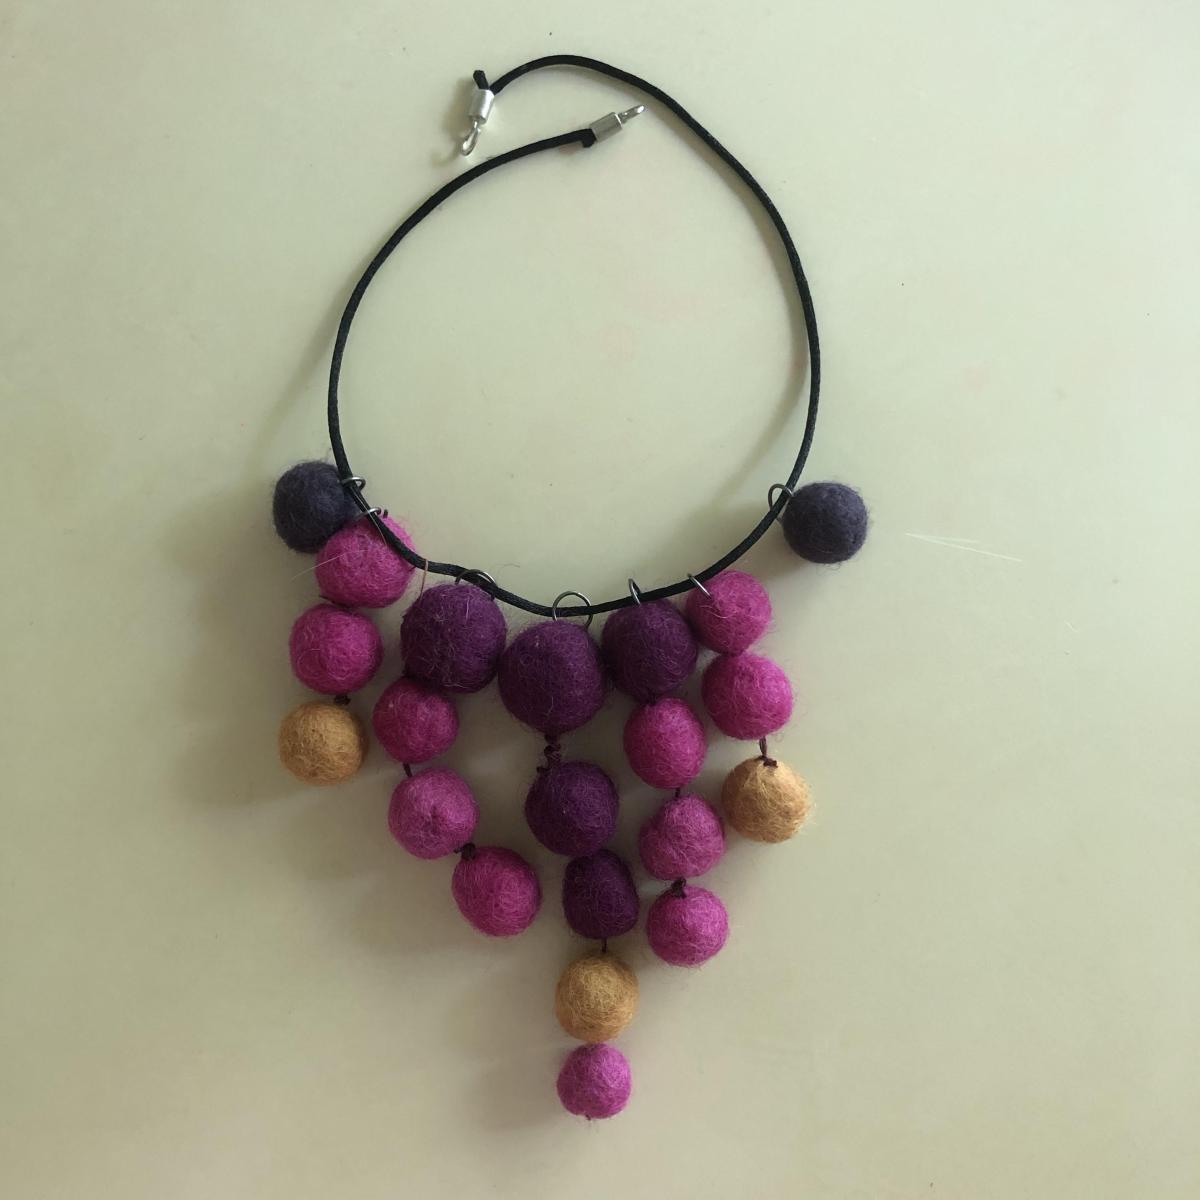 Felted necklace